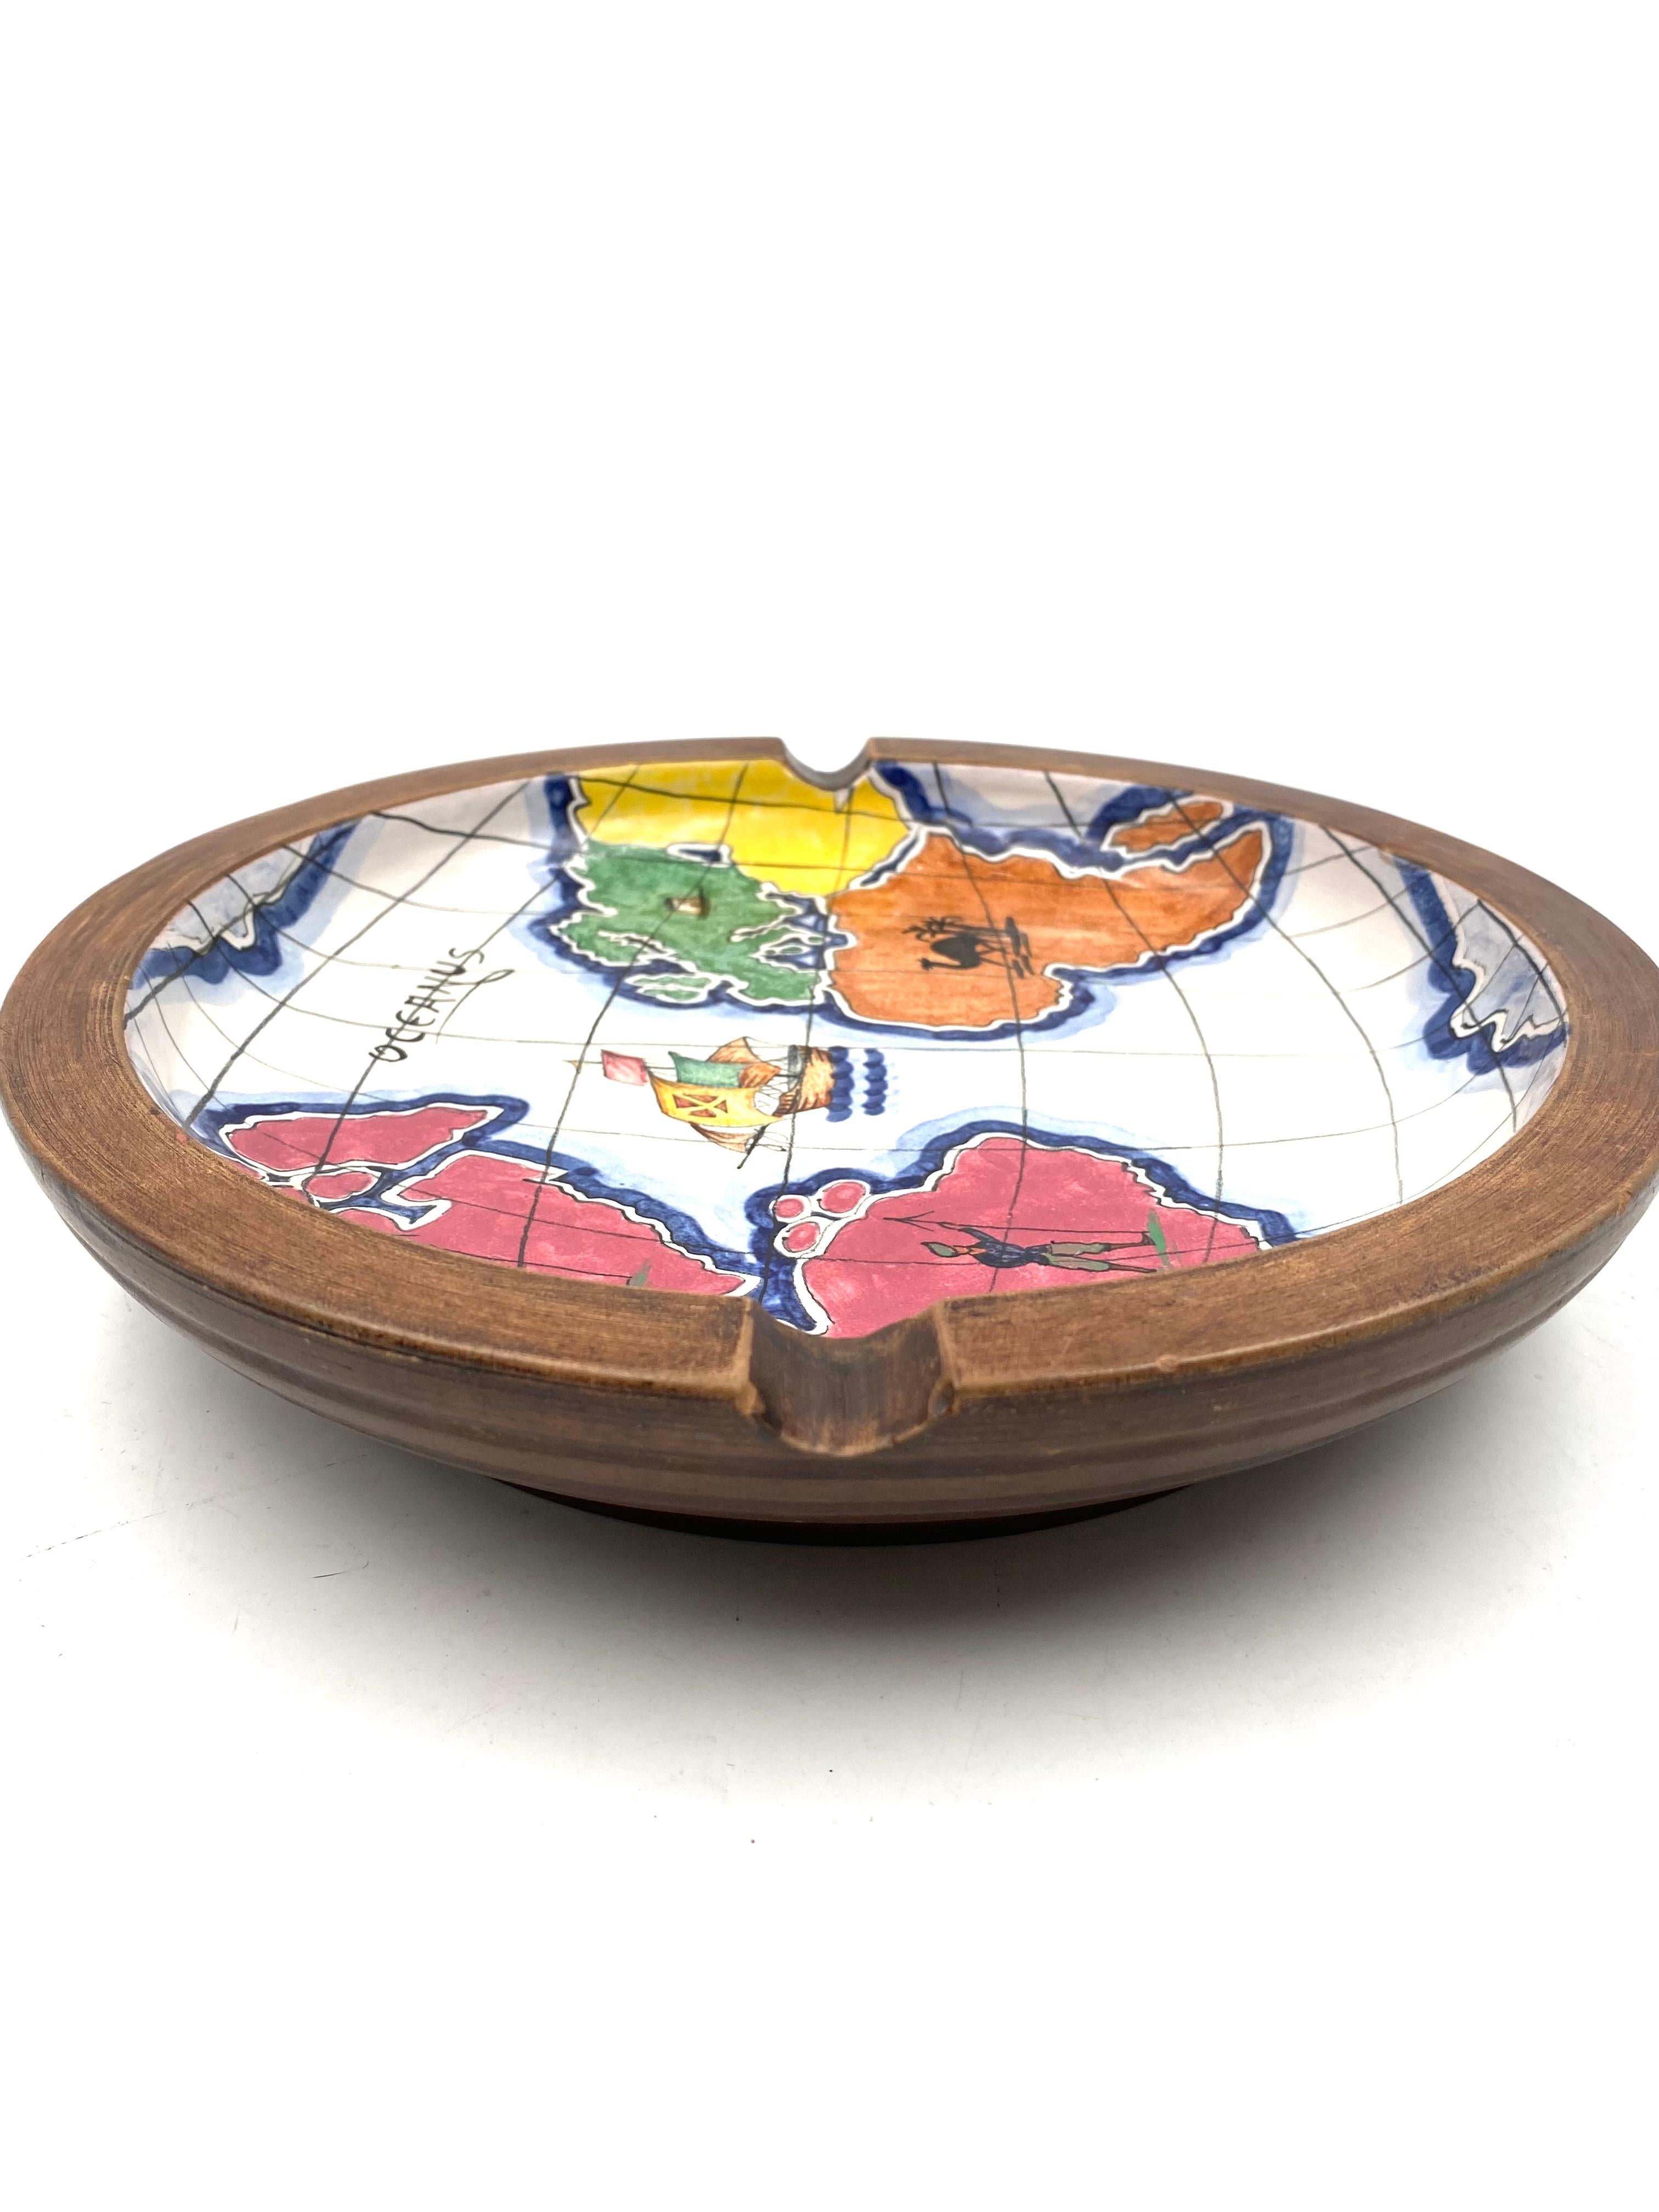 Polychrome Ceramic World Map Catchall / Ashtray, Zaccagnini, Italy, 1940s For Sale 1